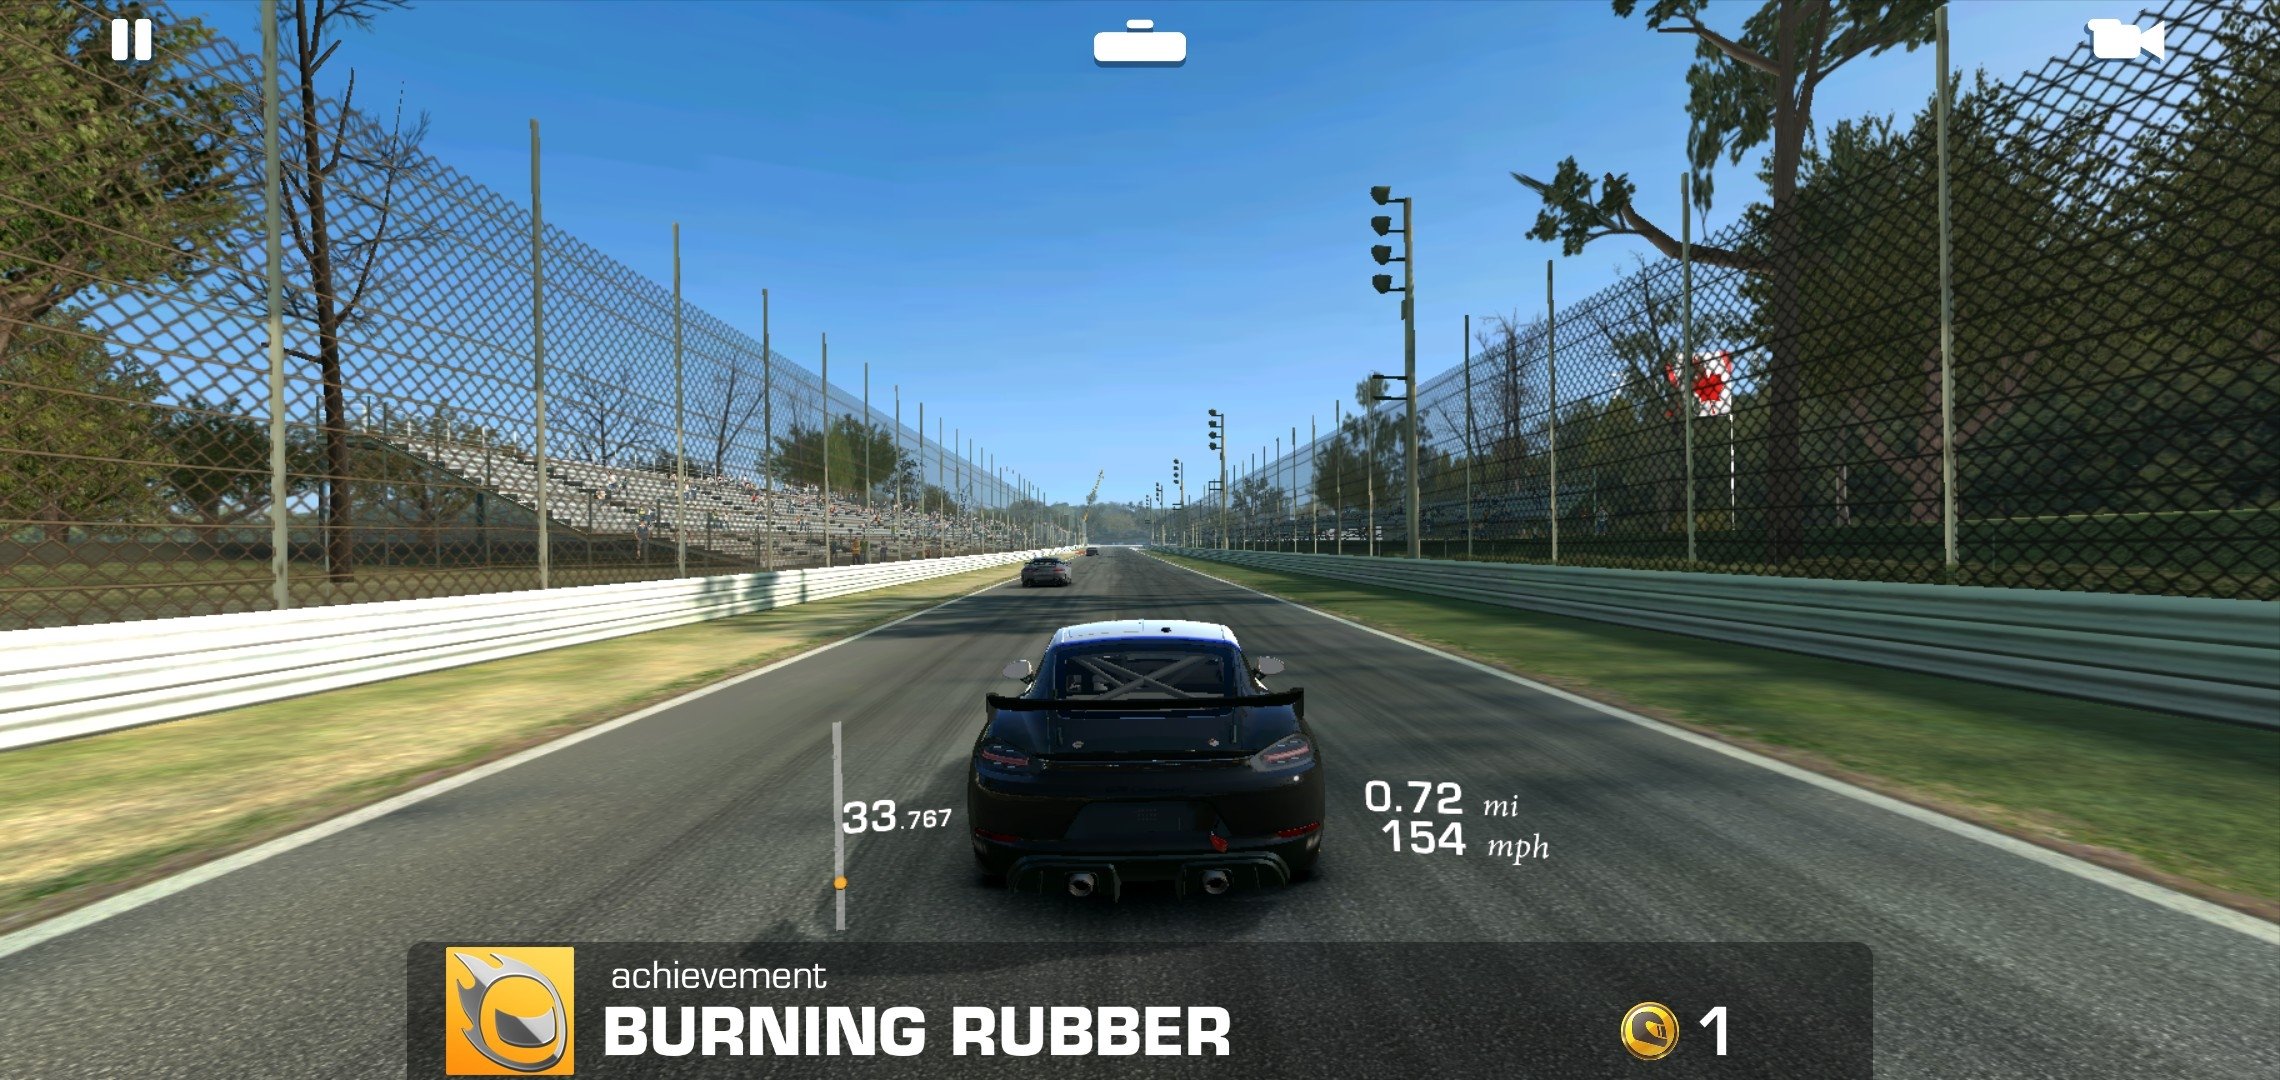 Real Racing 3 Mod Apk 11.6.1 (Money,Unlocked Cars) Android